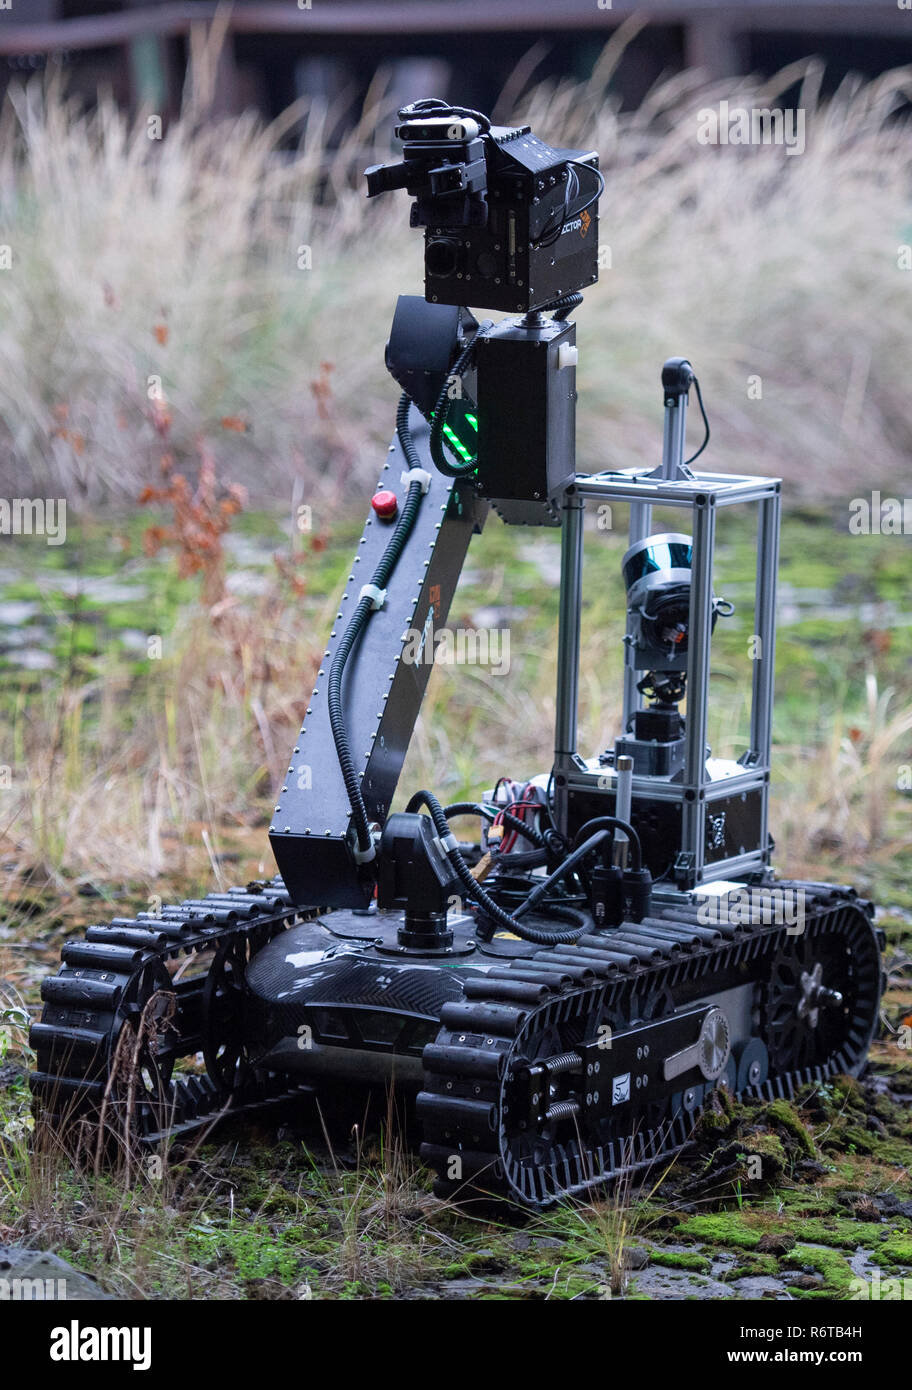 Dortmund, Germany. 06th Dec, 2018. The reconnaissance robot "Hector" is exhibited at a presentation. The robot is part of a research project robots at the Technical University of Credit: